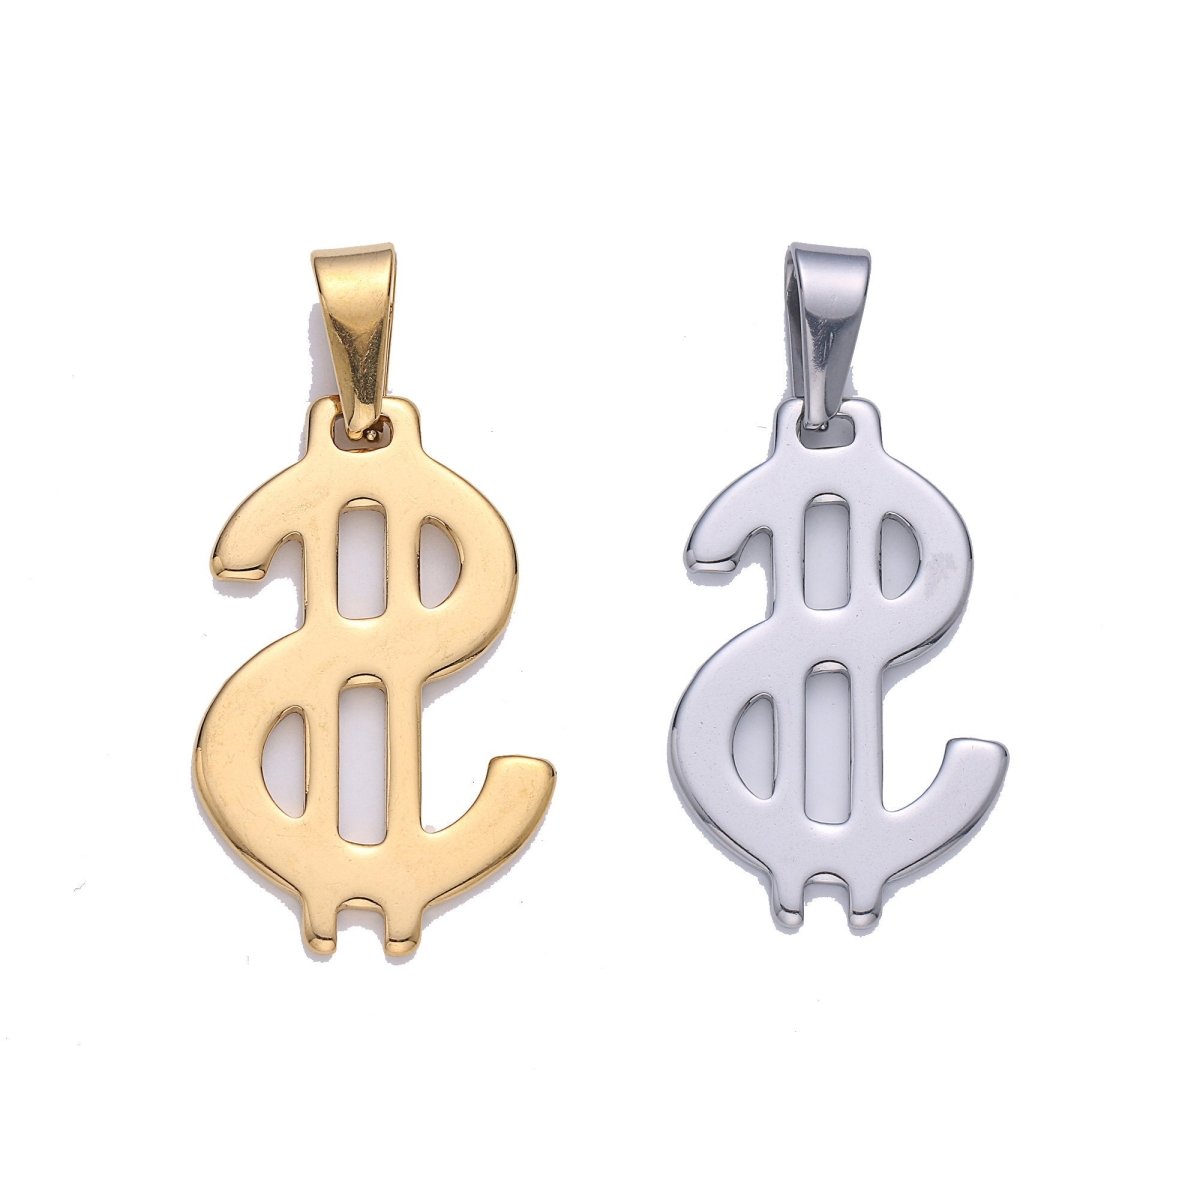 Gold Filled Stainless Steel Dollar Sign, Golden US Dollar Currency, Necklace Pendant Charm Bead Bails Findings for Jewelry Making J-666 - DLUXCA